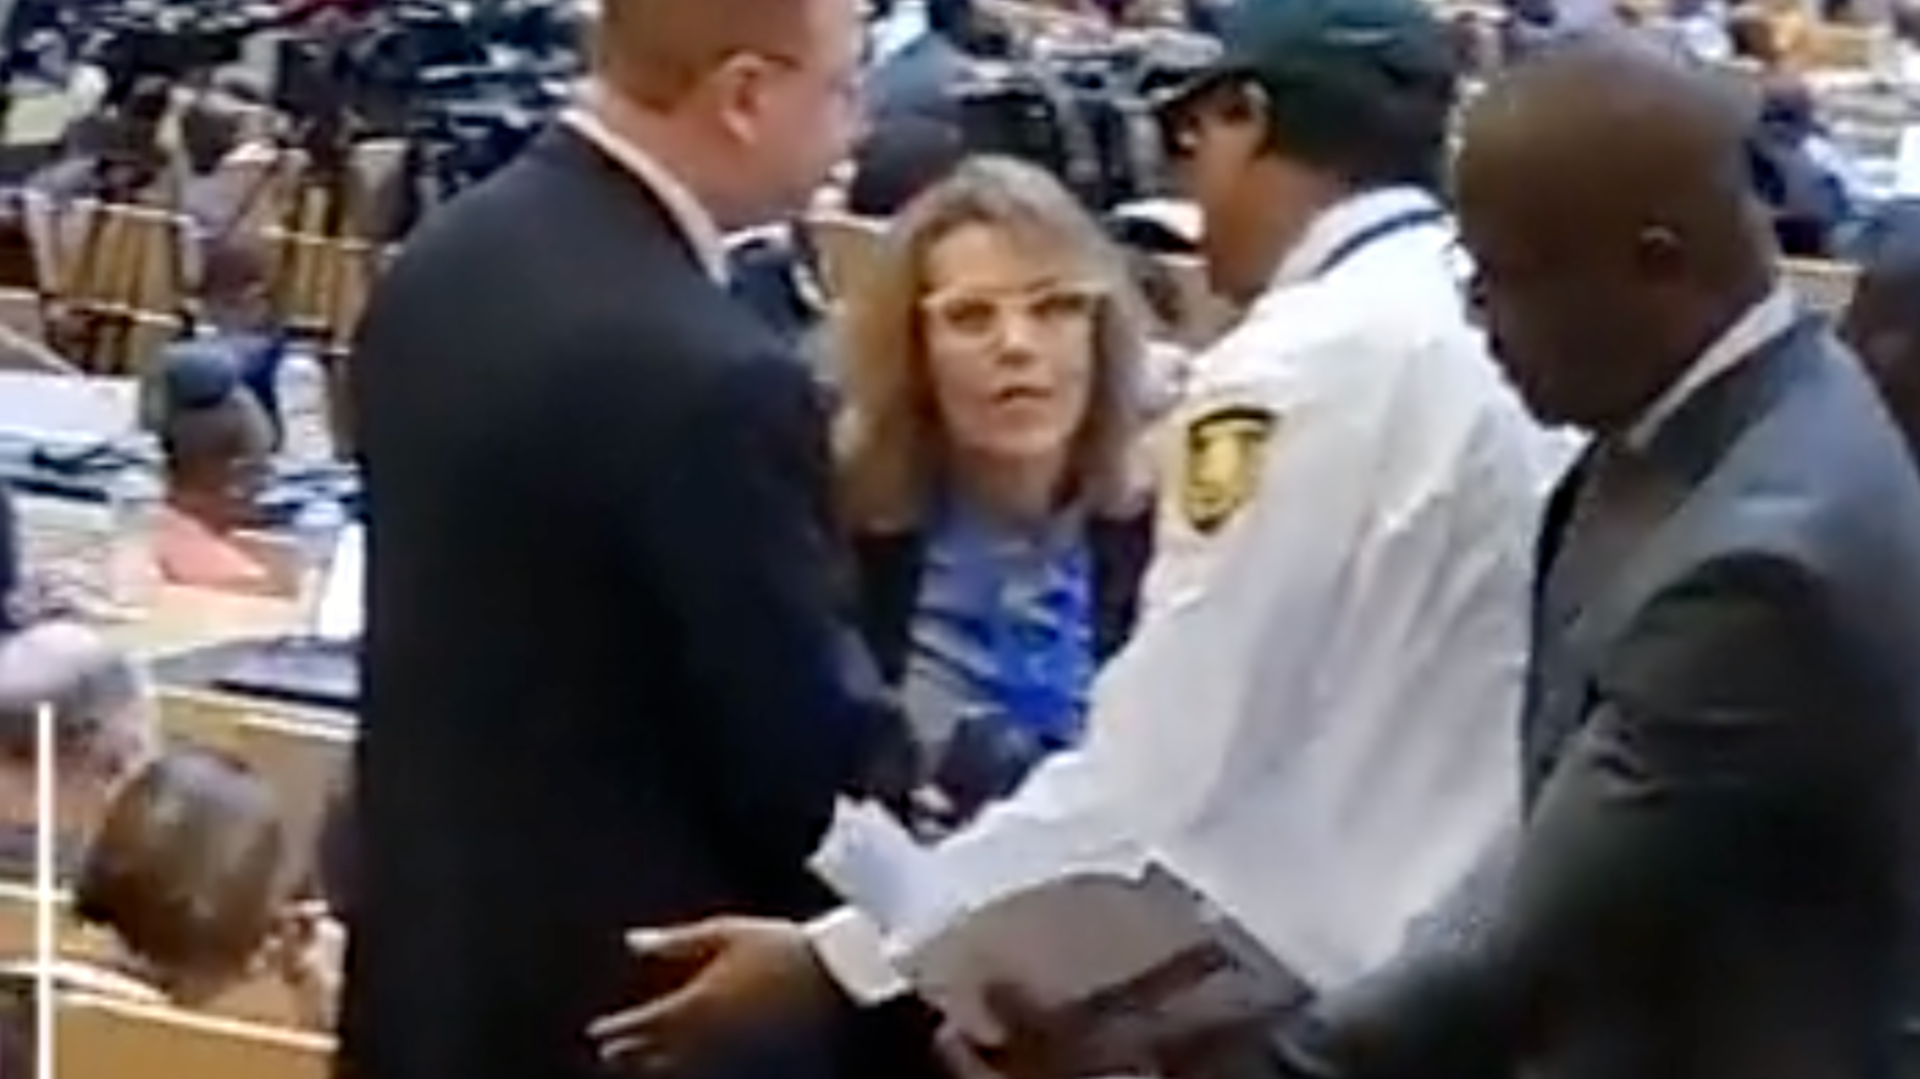 Sharon Bar-Li, the deputy director of the African Division at the Israeli foreign ministry, escorted out of the African Union summit in Ethiopia's Addis Ababa on 18 February 2023 (Screengrab)